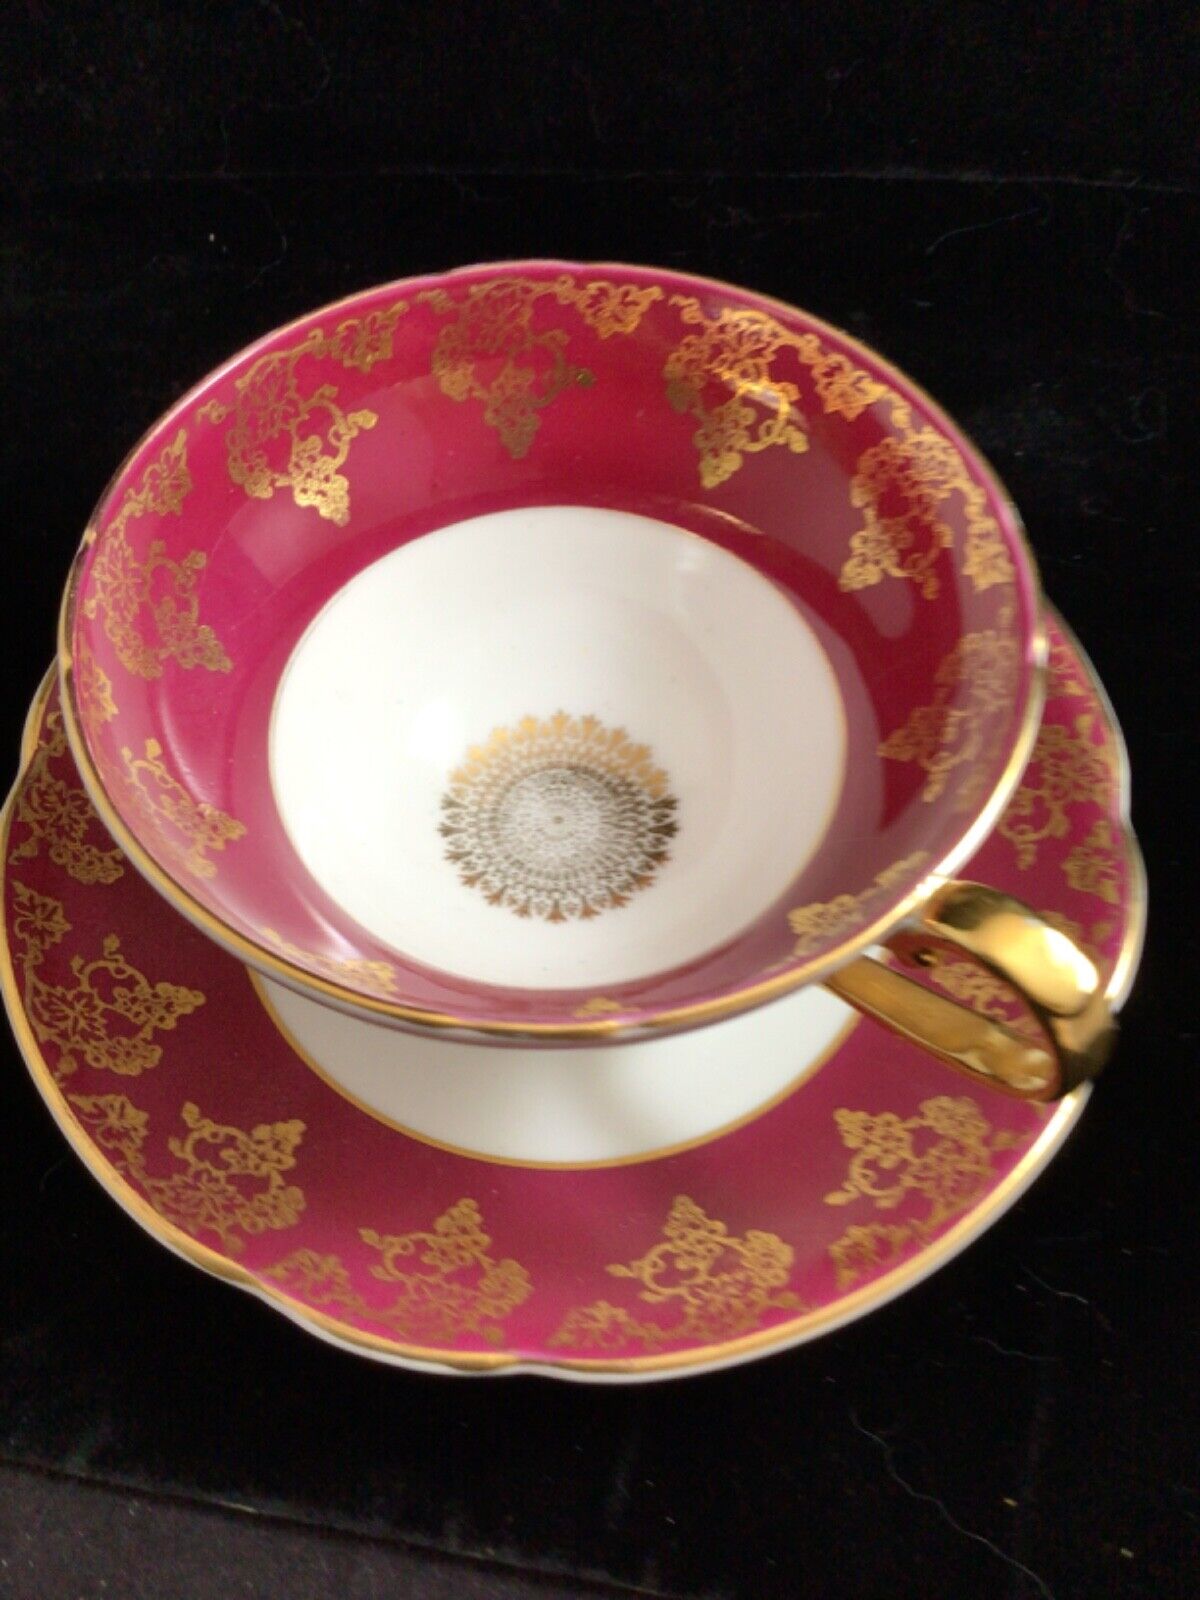 Stanley Fine Bone China Teacup and Saucer Burgundy Red with Gold Filigree